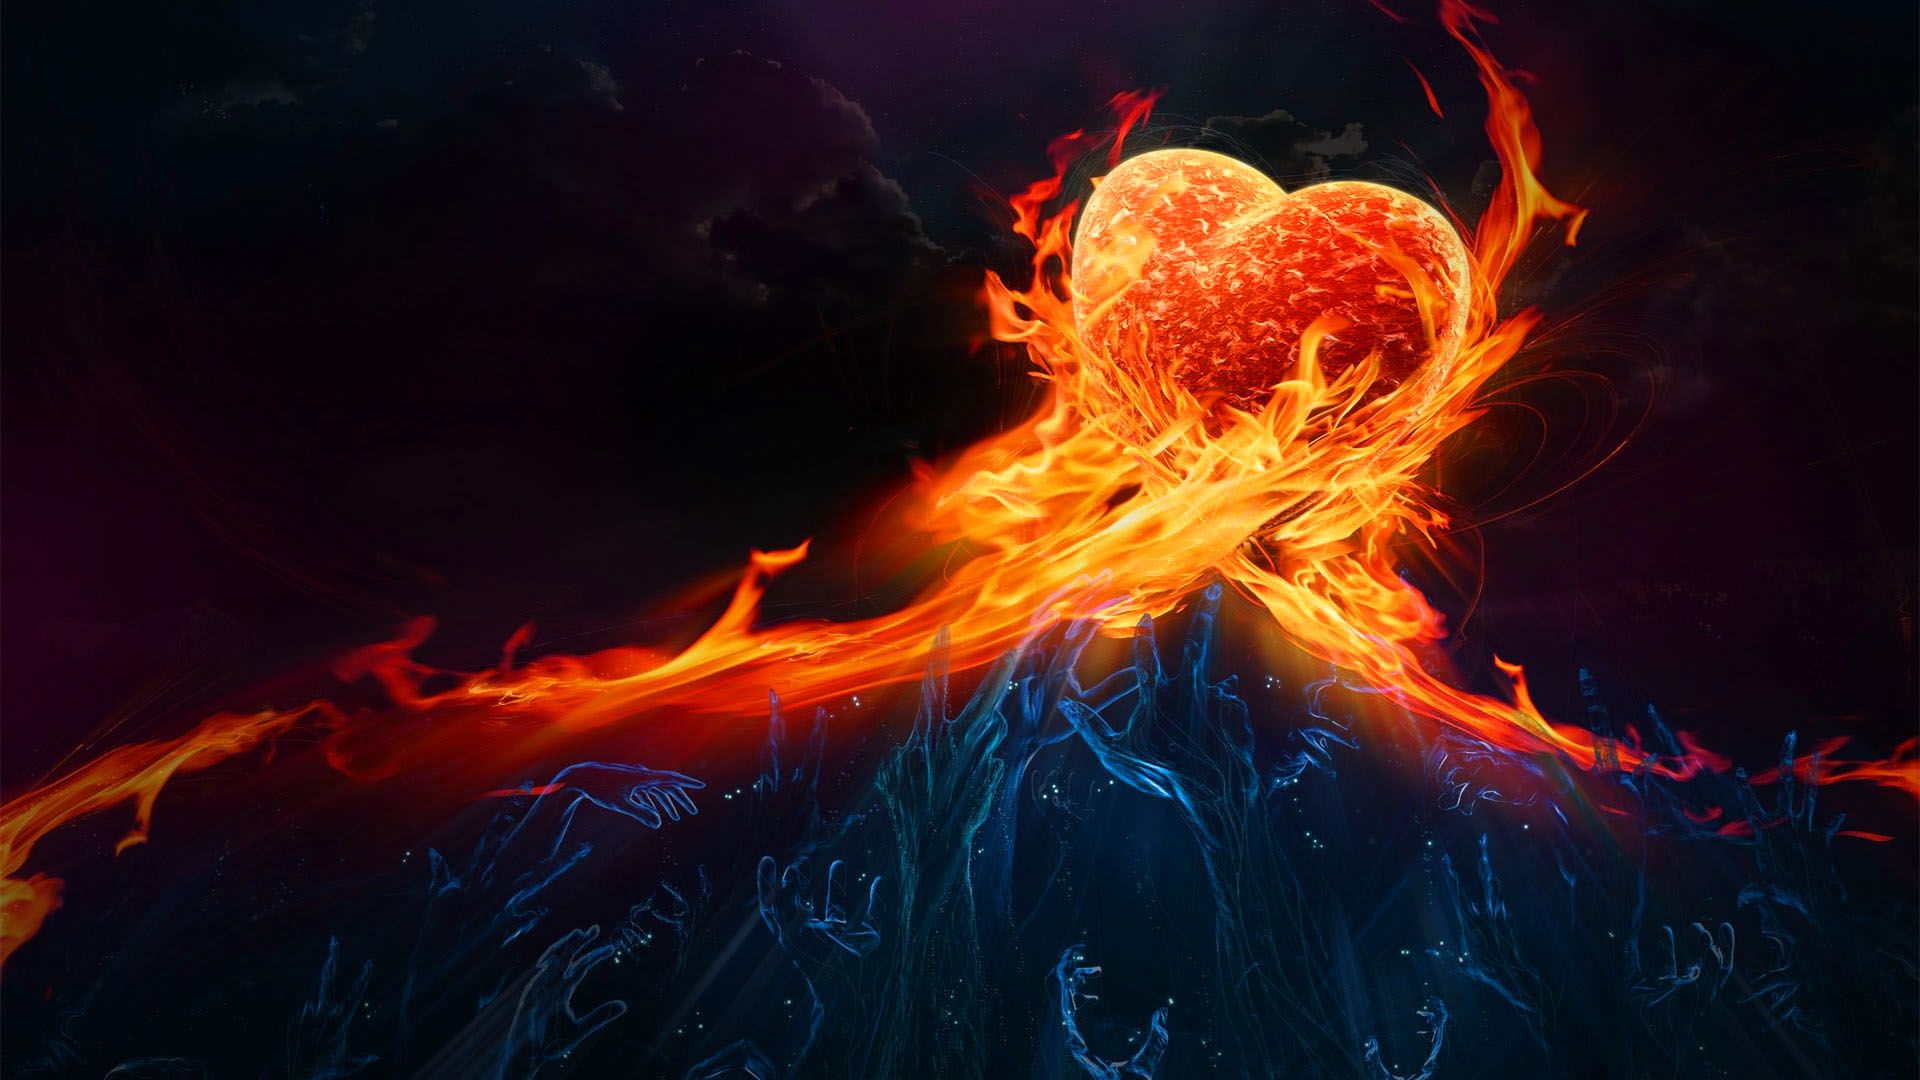 Abstract Fire Love Hd Wallpapers Love Couples In 2019 - Love Fire Images Hd , HD Wallpaper & Backgrounds